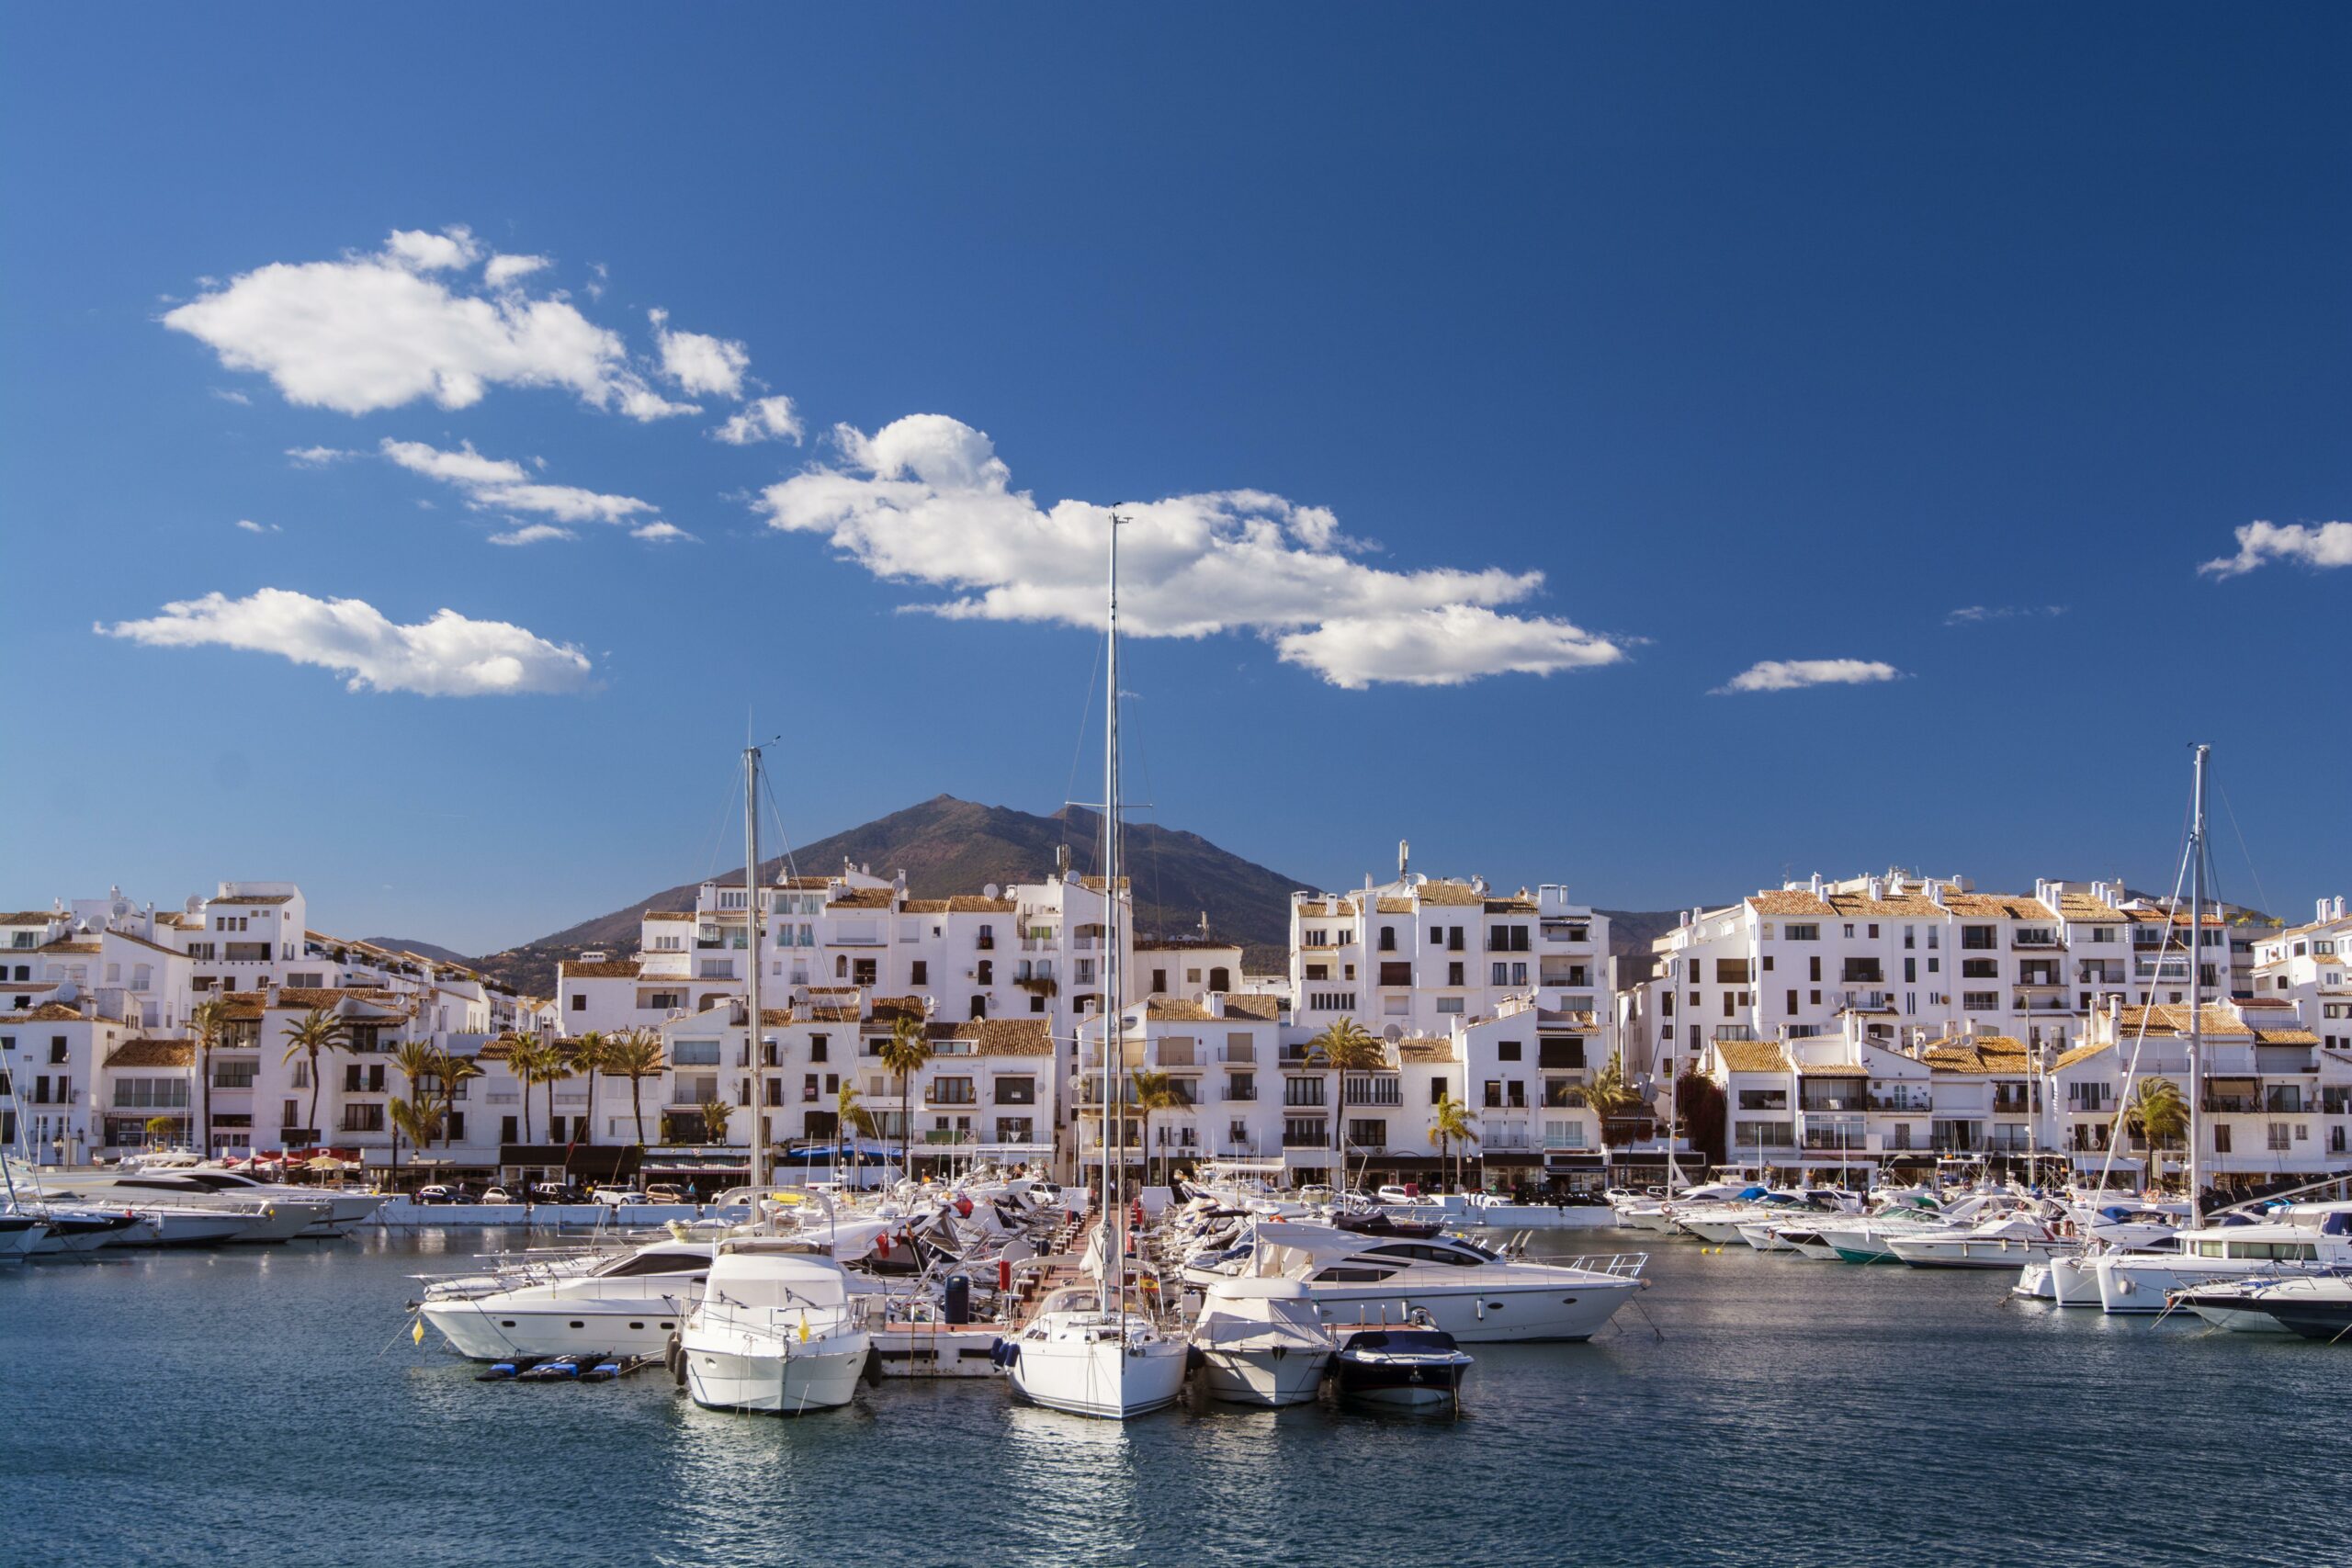 Reasons to visit Puerto Banus once in your life